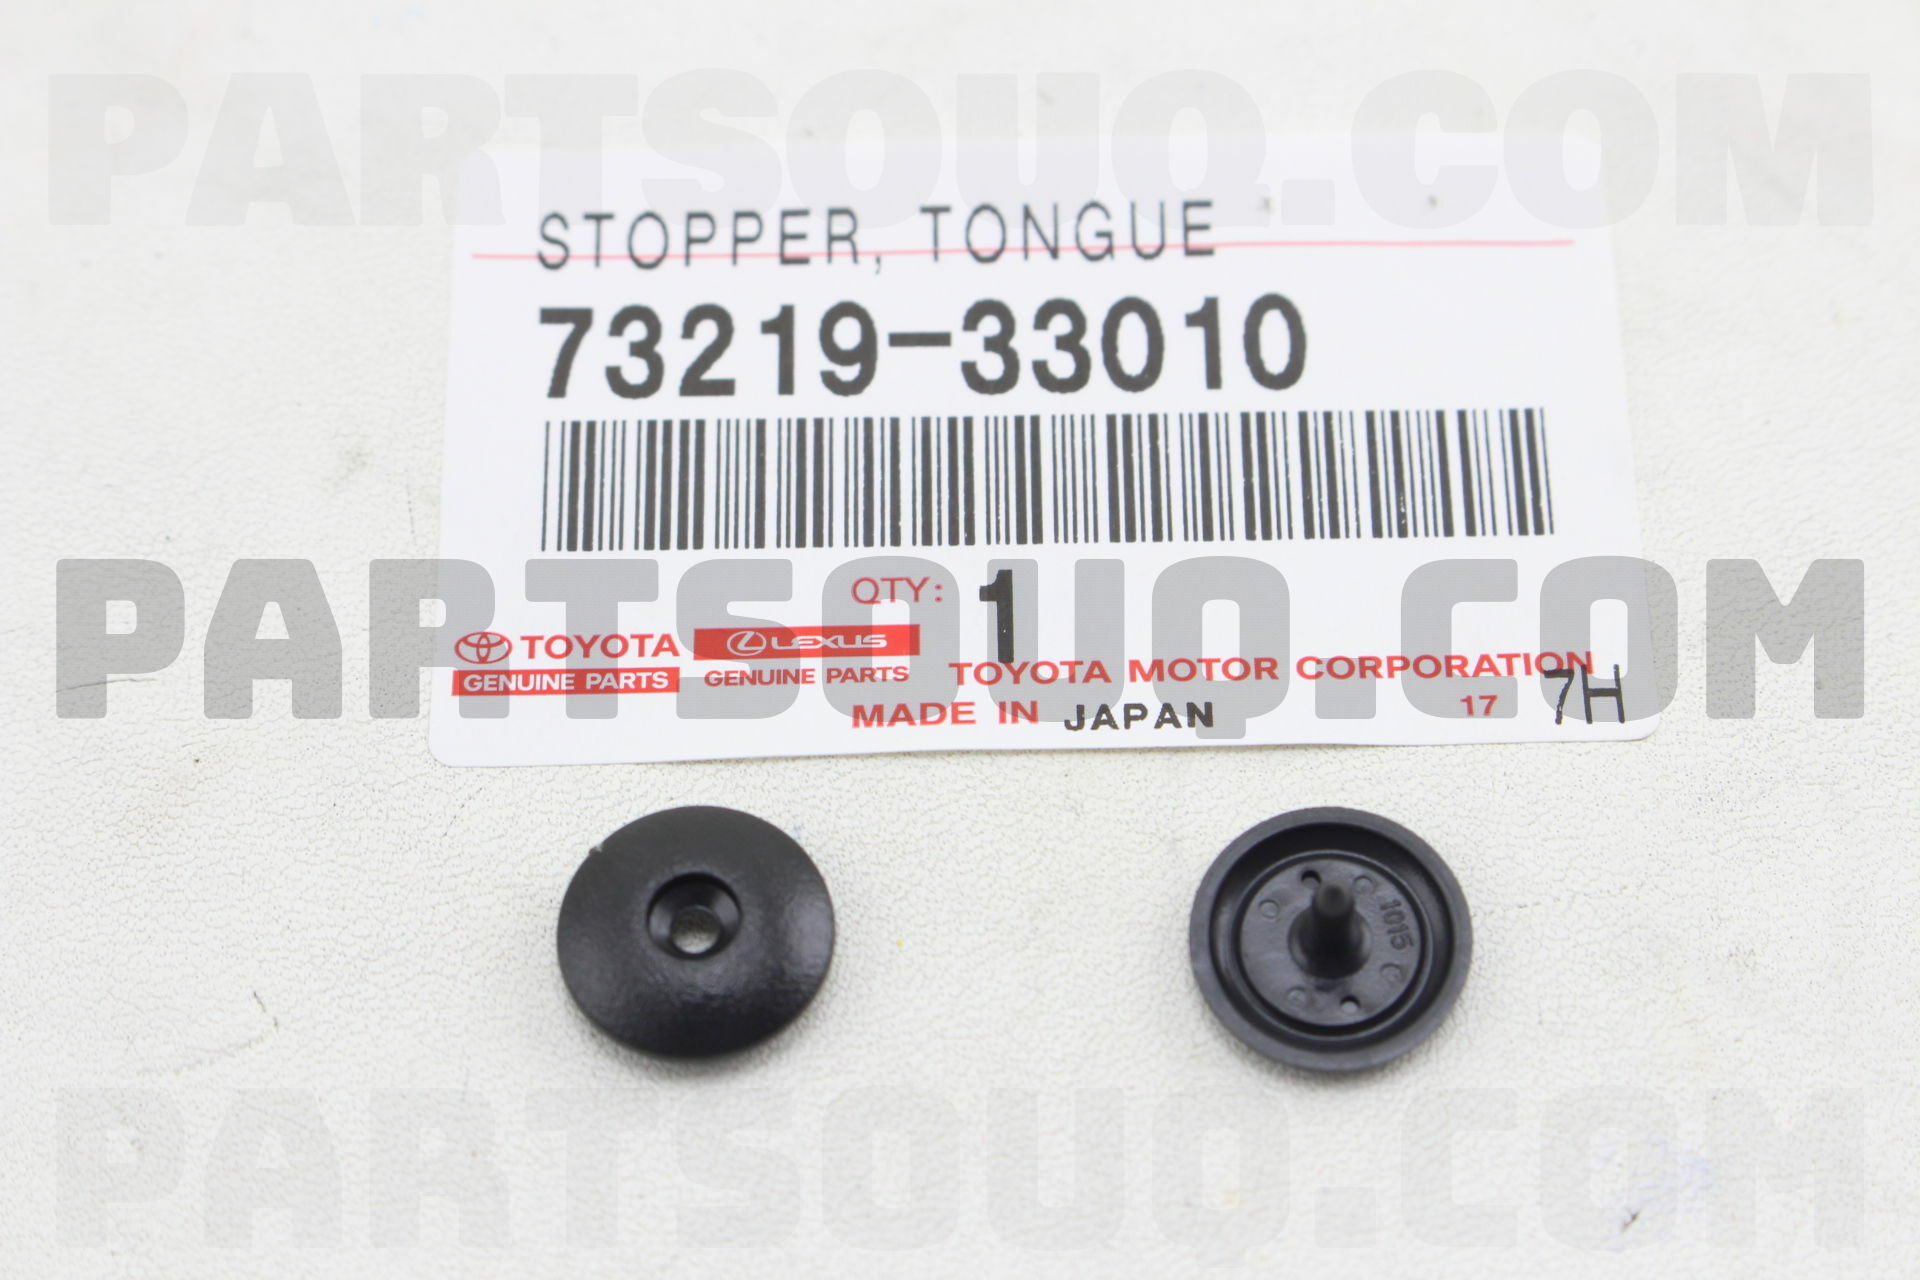 7321933010 Toyota STOPPER, TONGUE PLATE